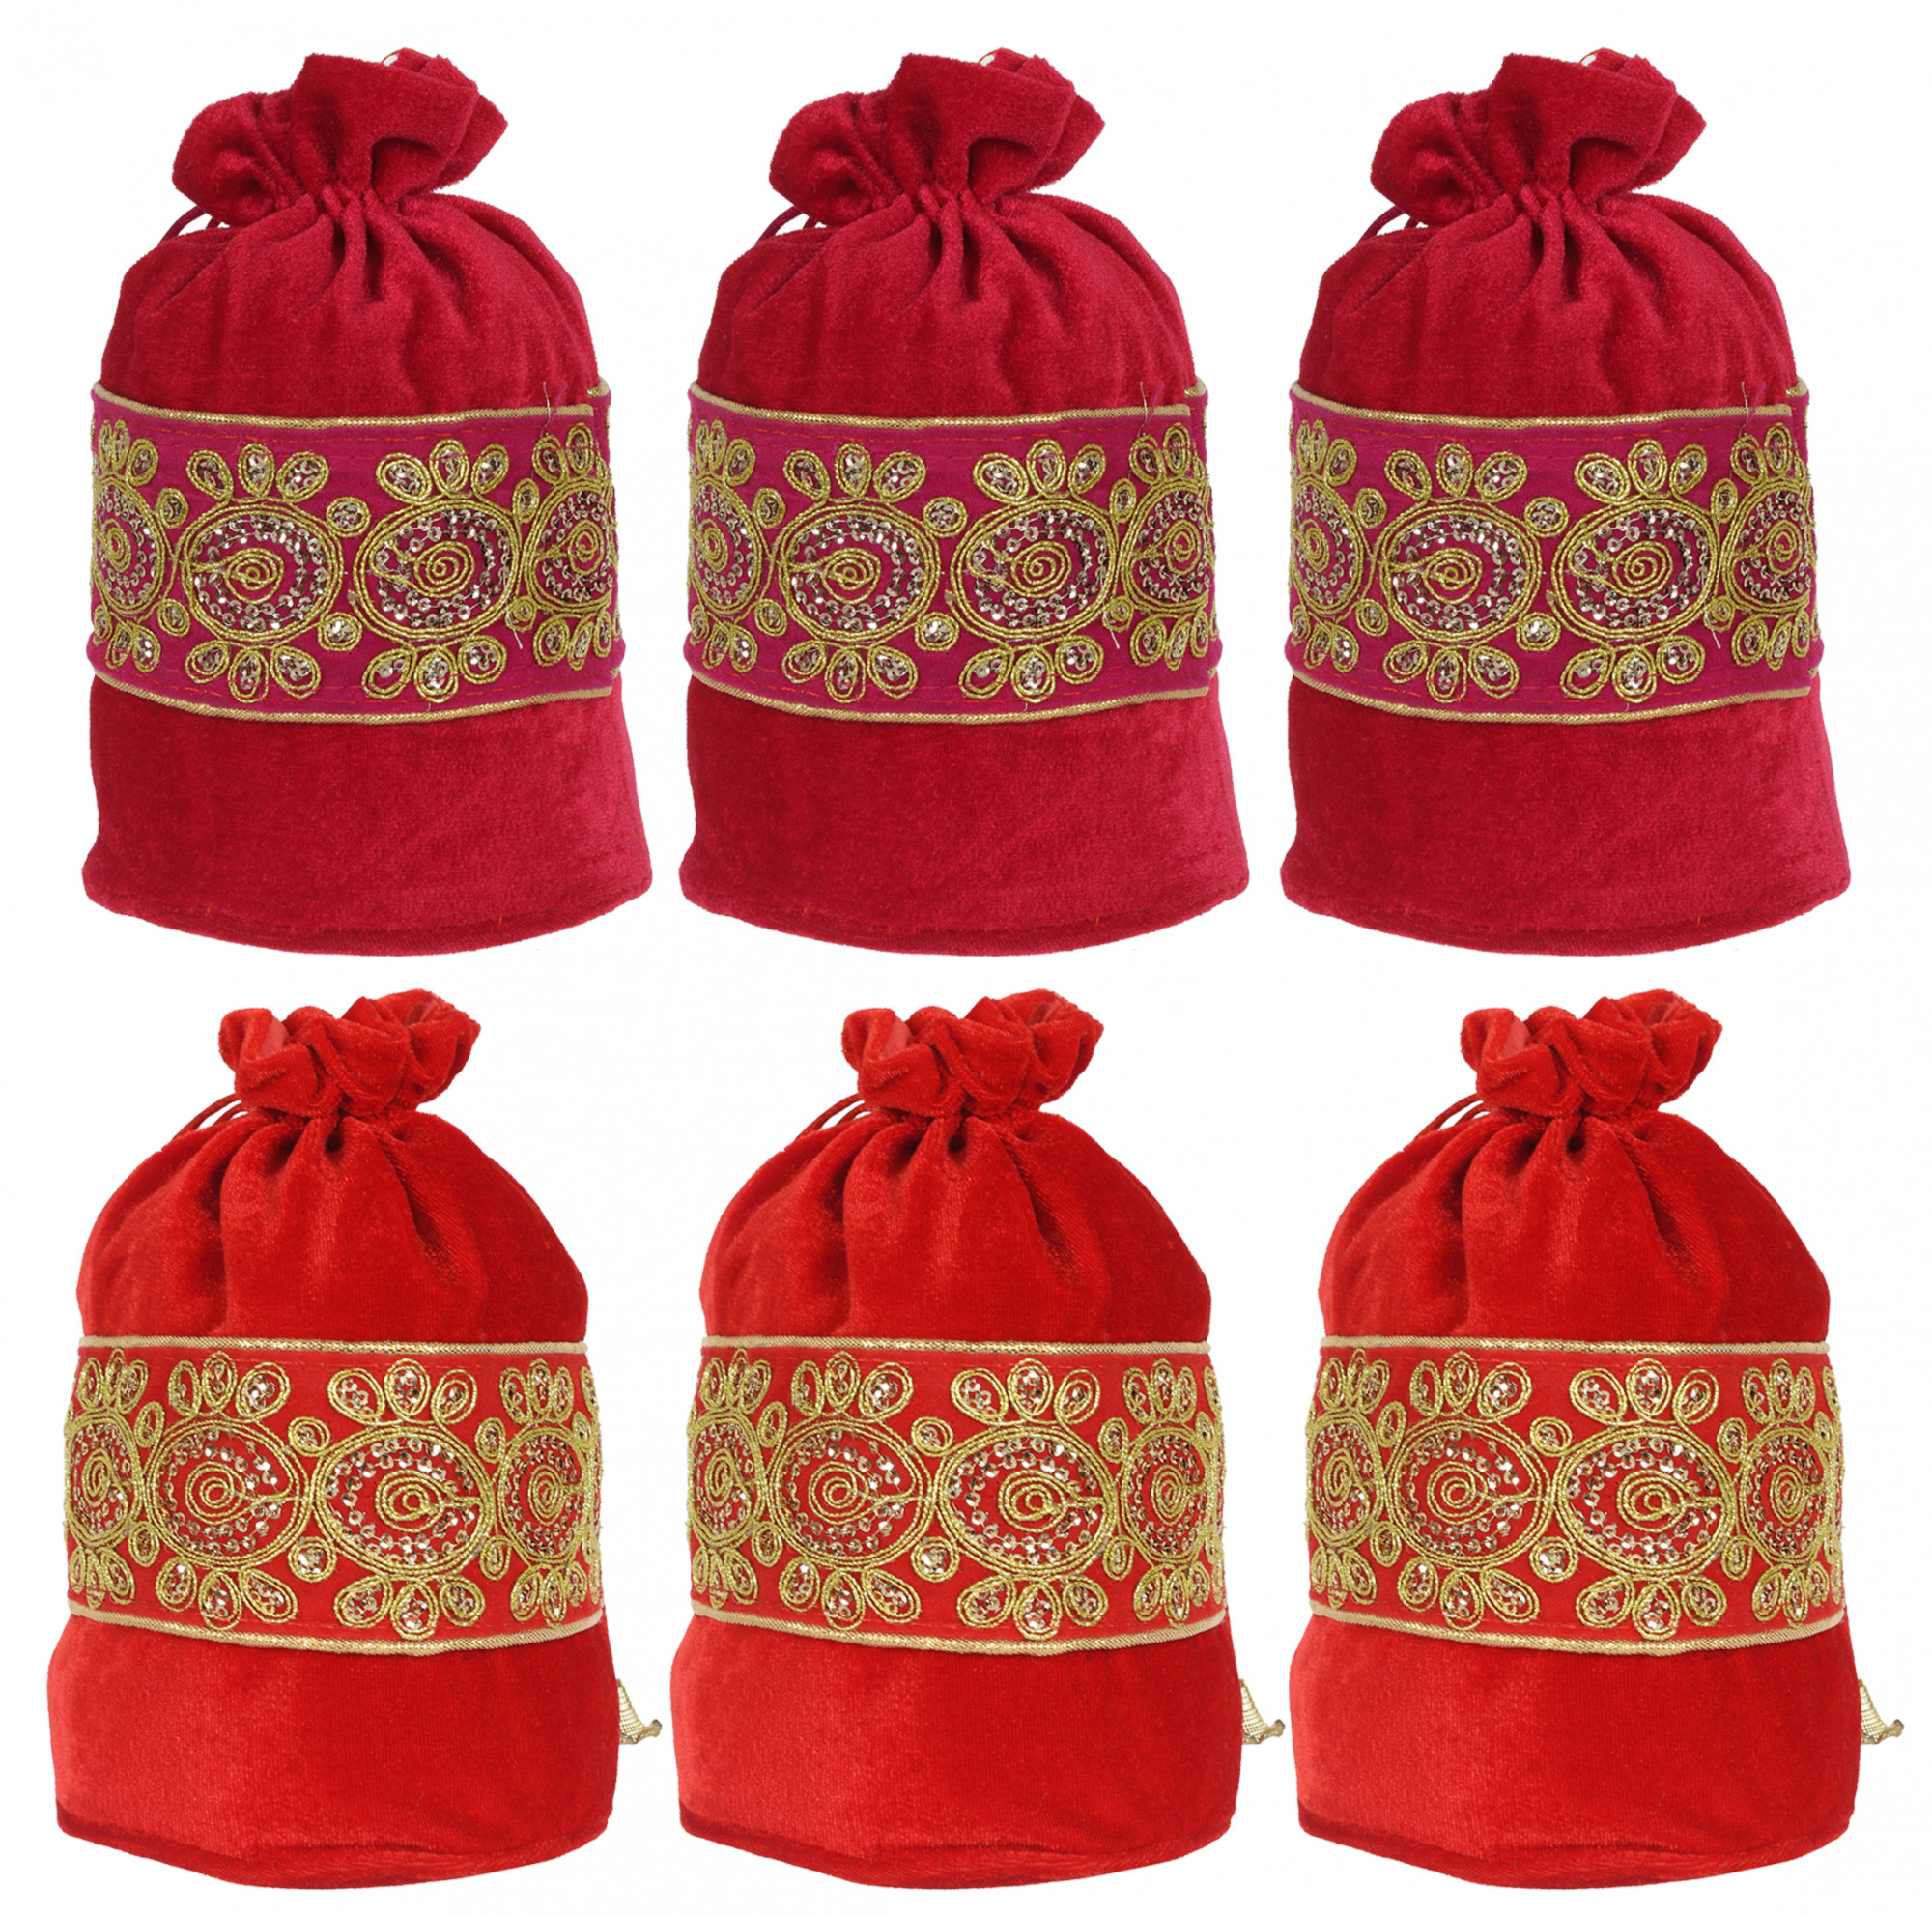 Kuber Industries Embroidered Design Drawstring Potli Bag Party Wedding Favor Gift Jewelry Bags-(Pink & Red)